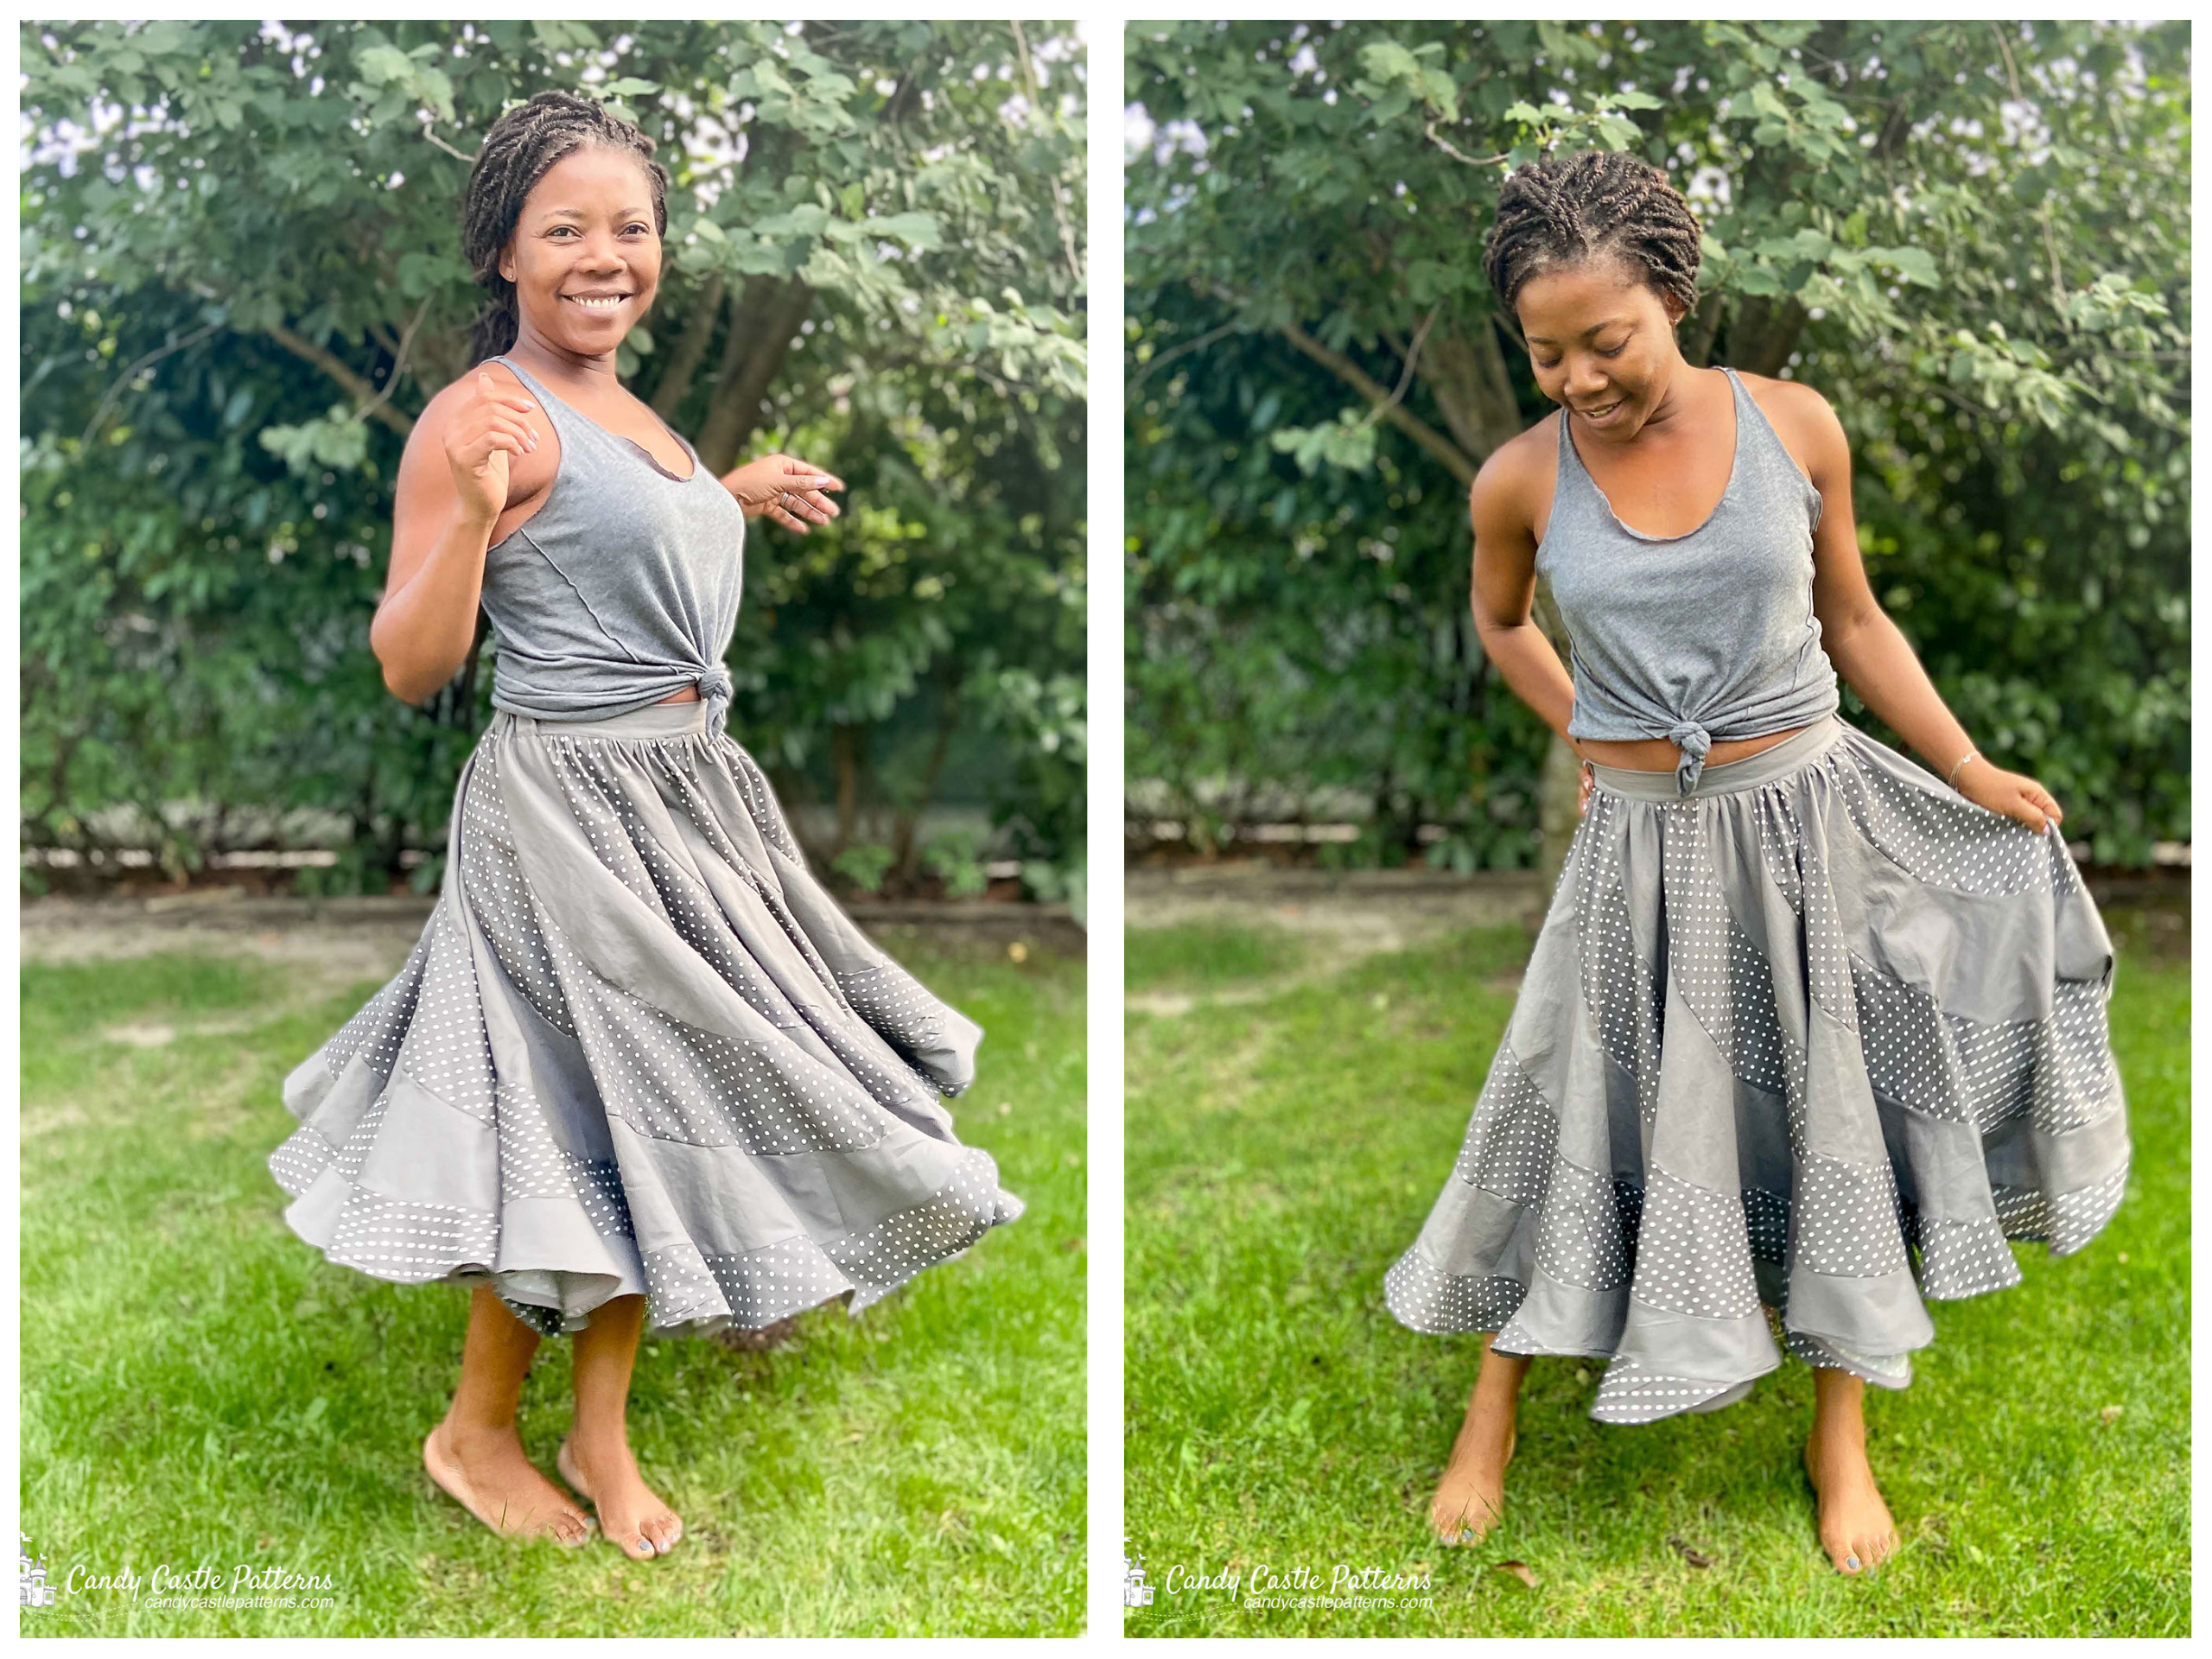 Wrap Twist  Tie How to Get 5 Great Looks with One Versatile Skirt Pattern   YouTube